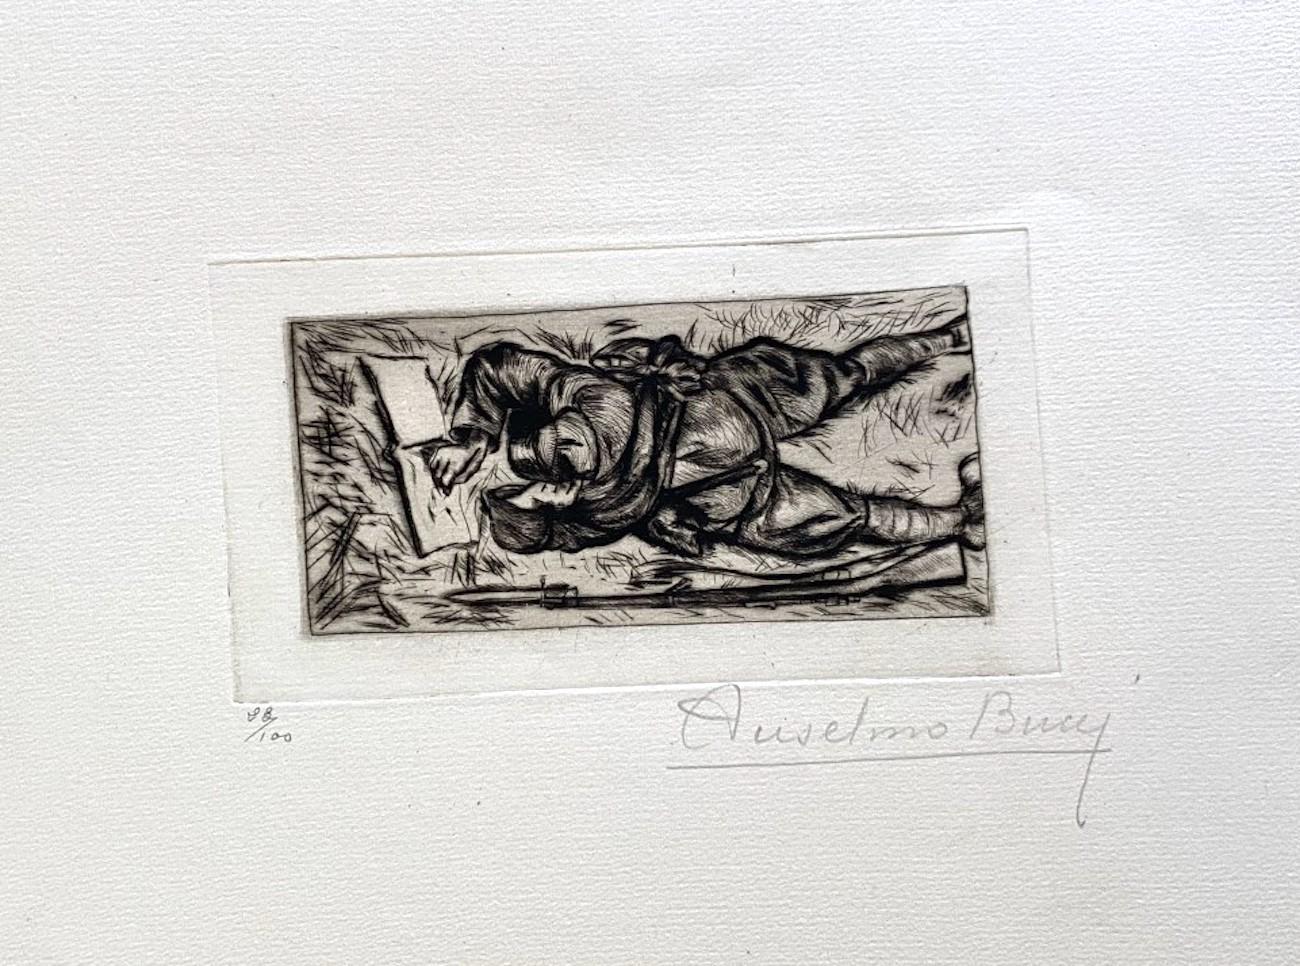 "Military" 1917s is a beautiful print in etching technique, realized by Anselmo Bucci (1887-1955).

Hand signed. Numbered 28/100 of prints on the lower left. On the lower left corner, an illegible iscription written in pencil.

Image Dimensions: 8.5